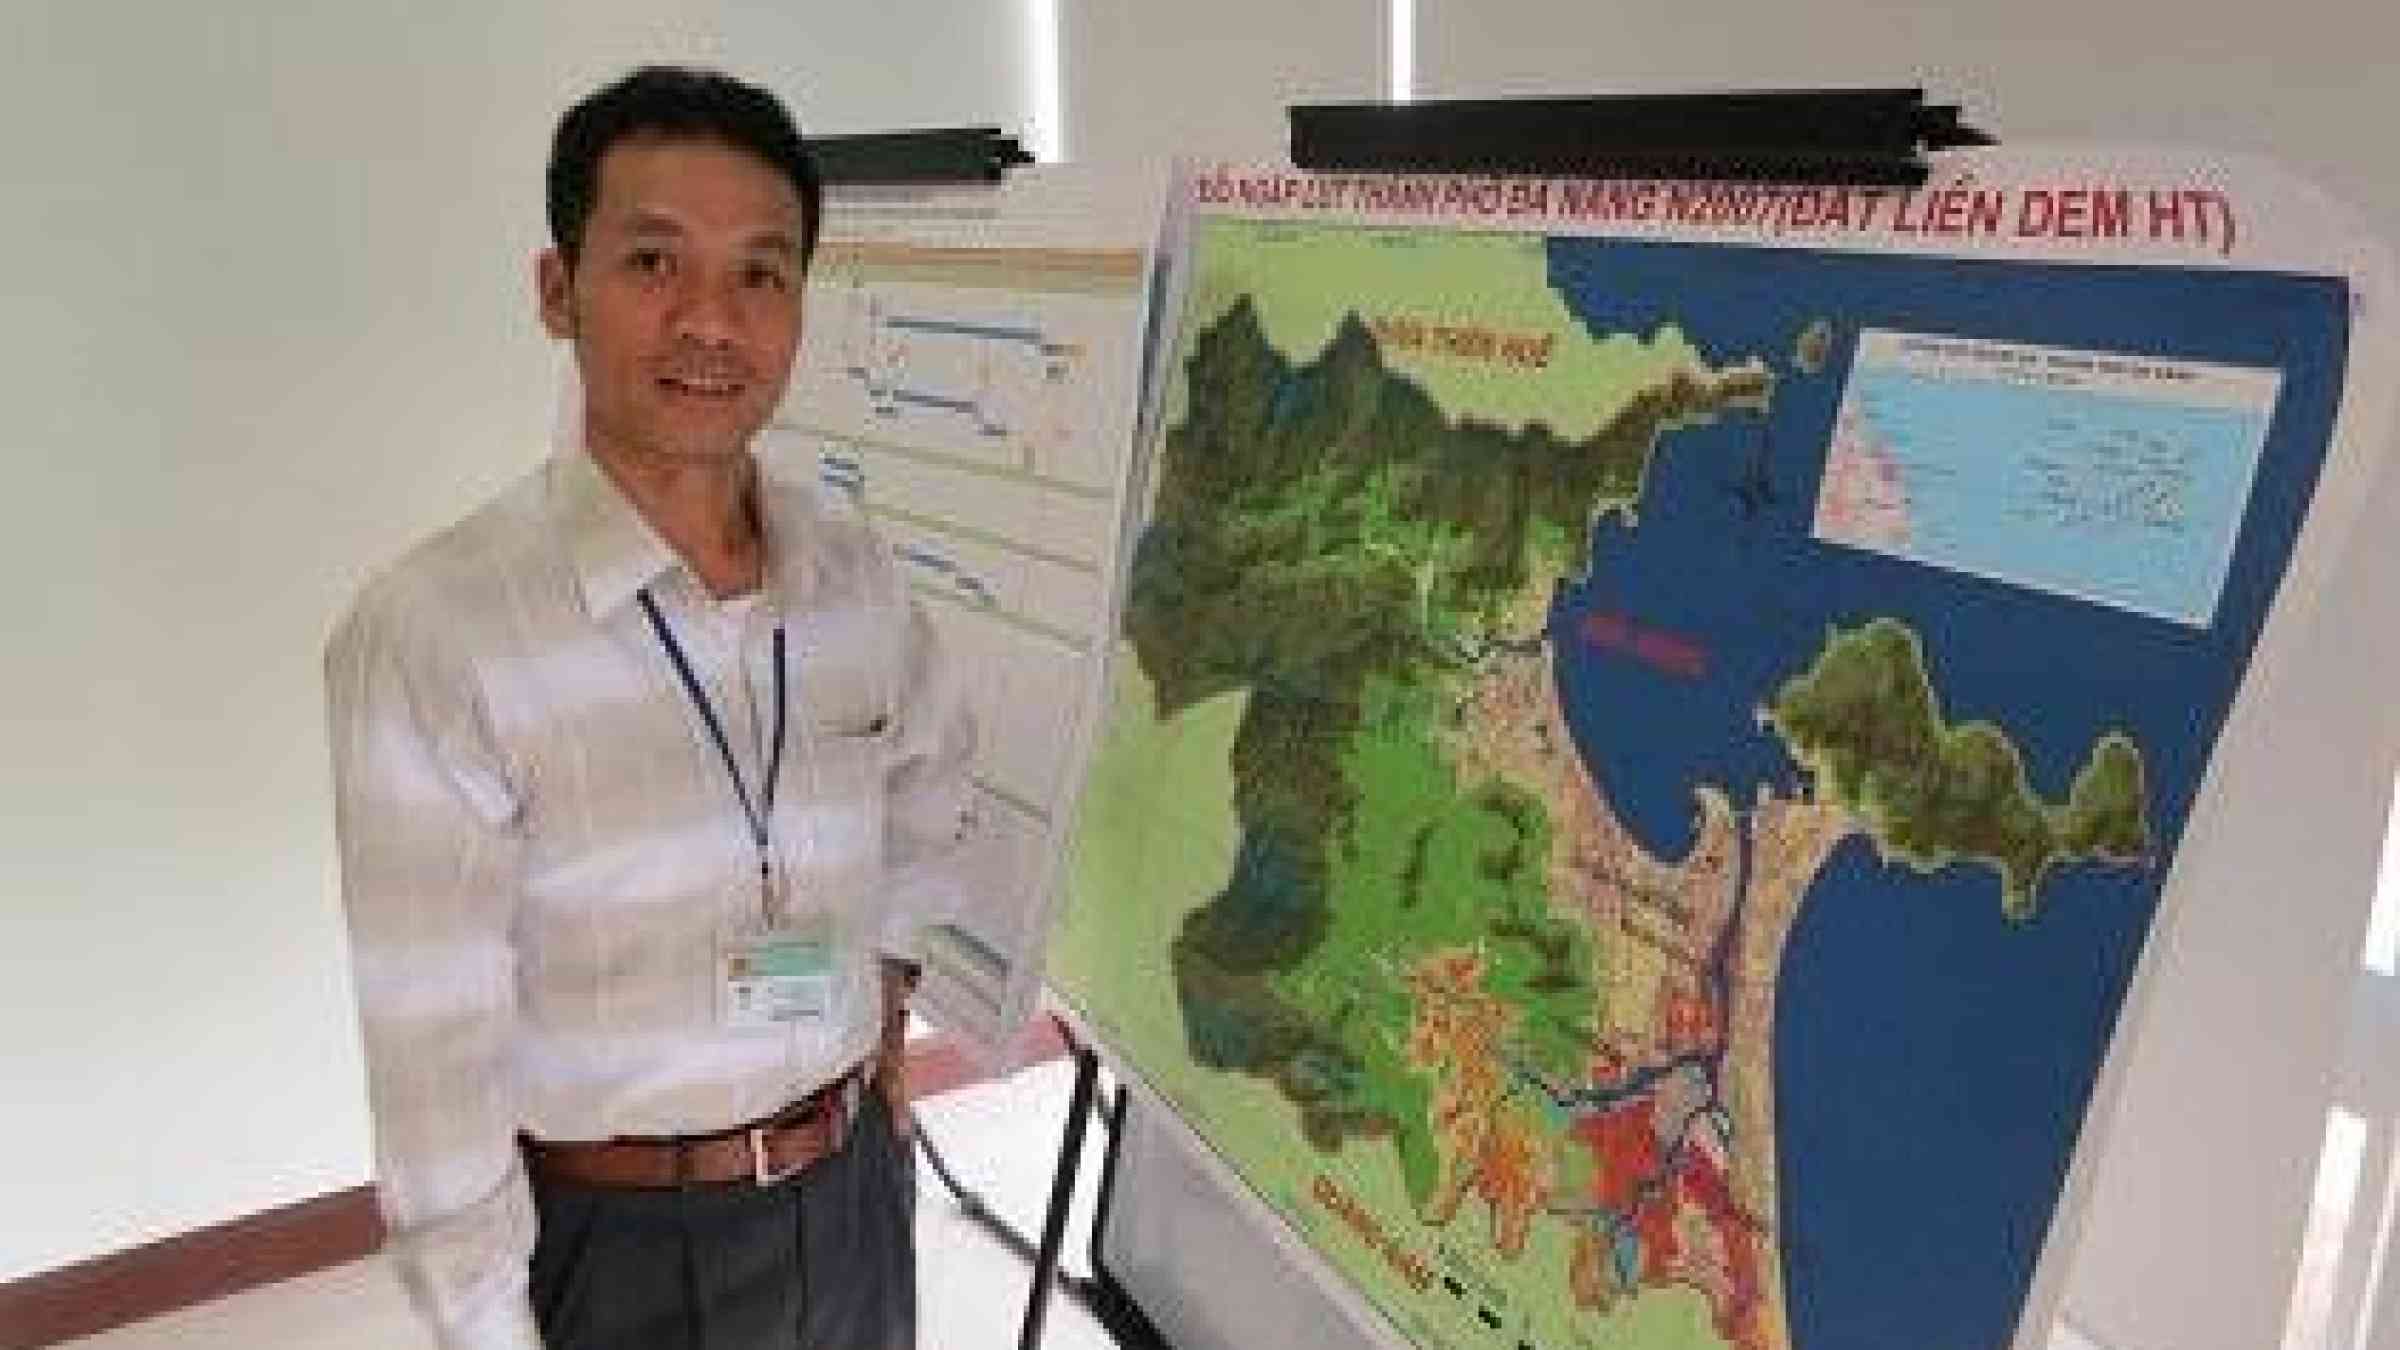 The Director of Da Nang Climate Change Coordination Office Dr Dinh Quang Cuong explains the city’s significant flood risk (Photo: UNISDR)